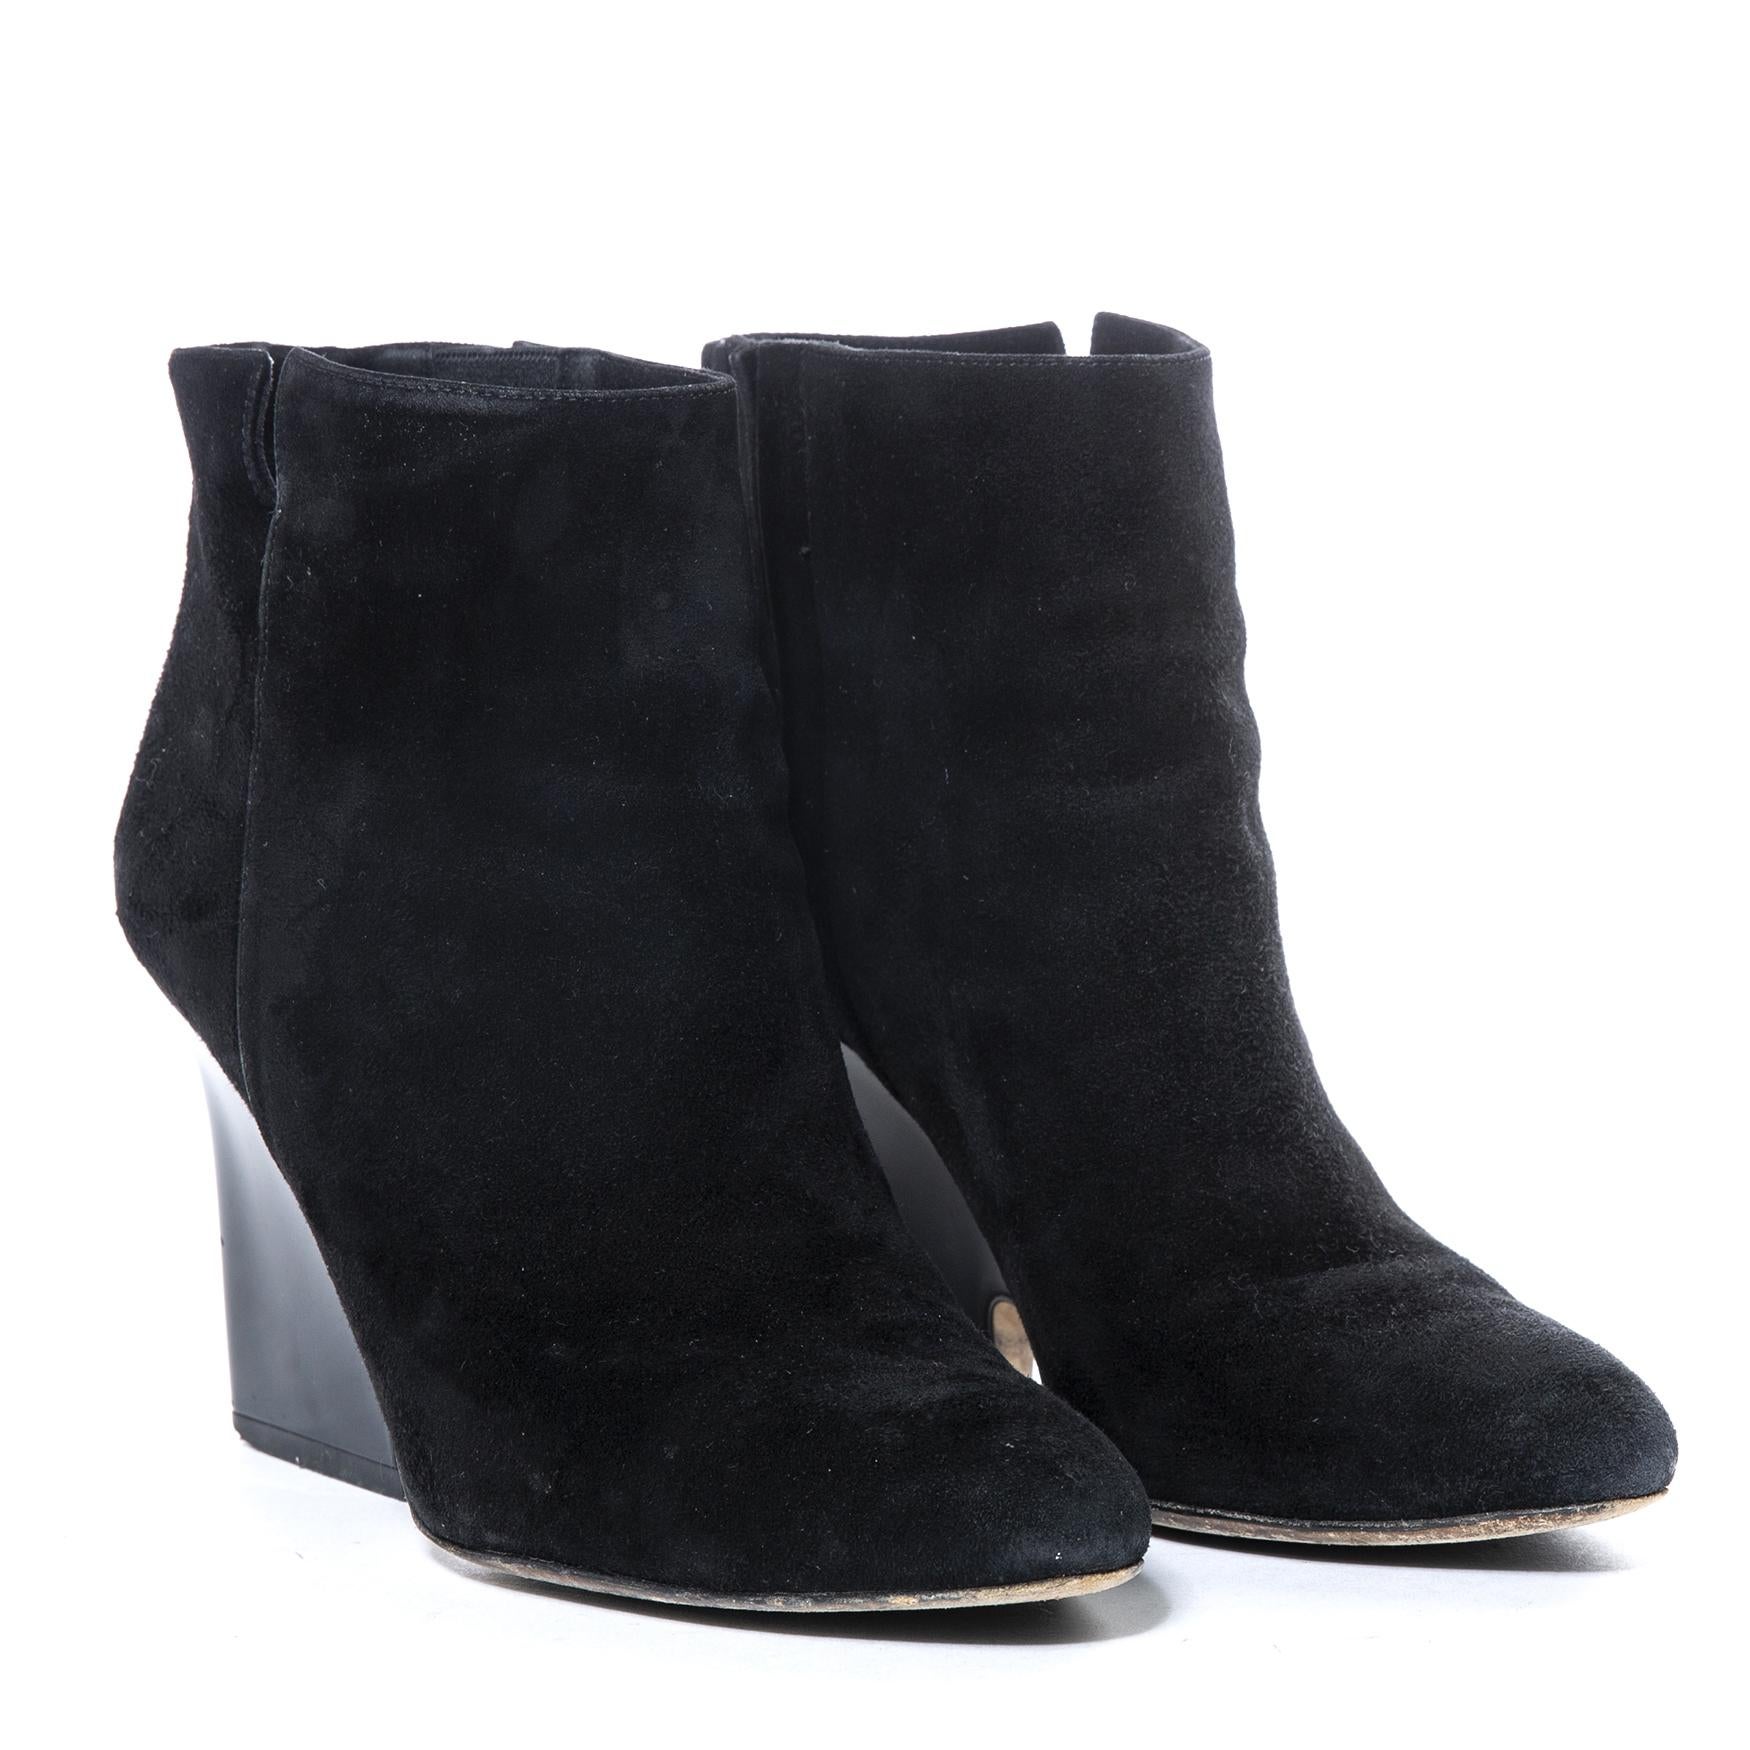 Very good preloved condition

Jimmy Choo Black Suede Ankle Boots - Size 36

Start fall season in style. 
This ankle boots are styled in a black suede and features a black patent wedge. 